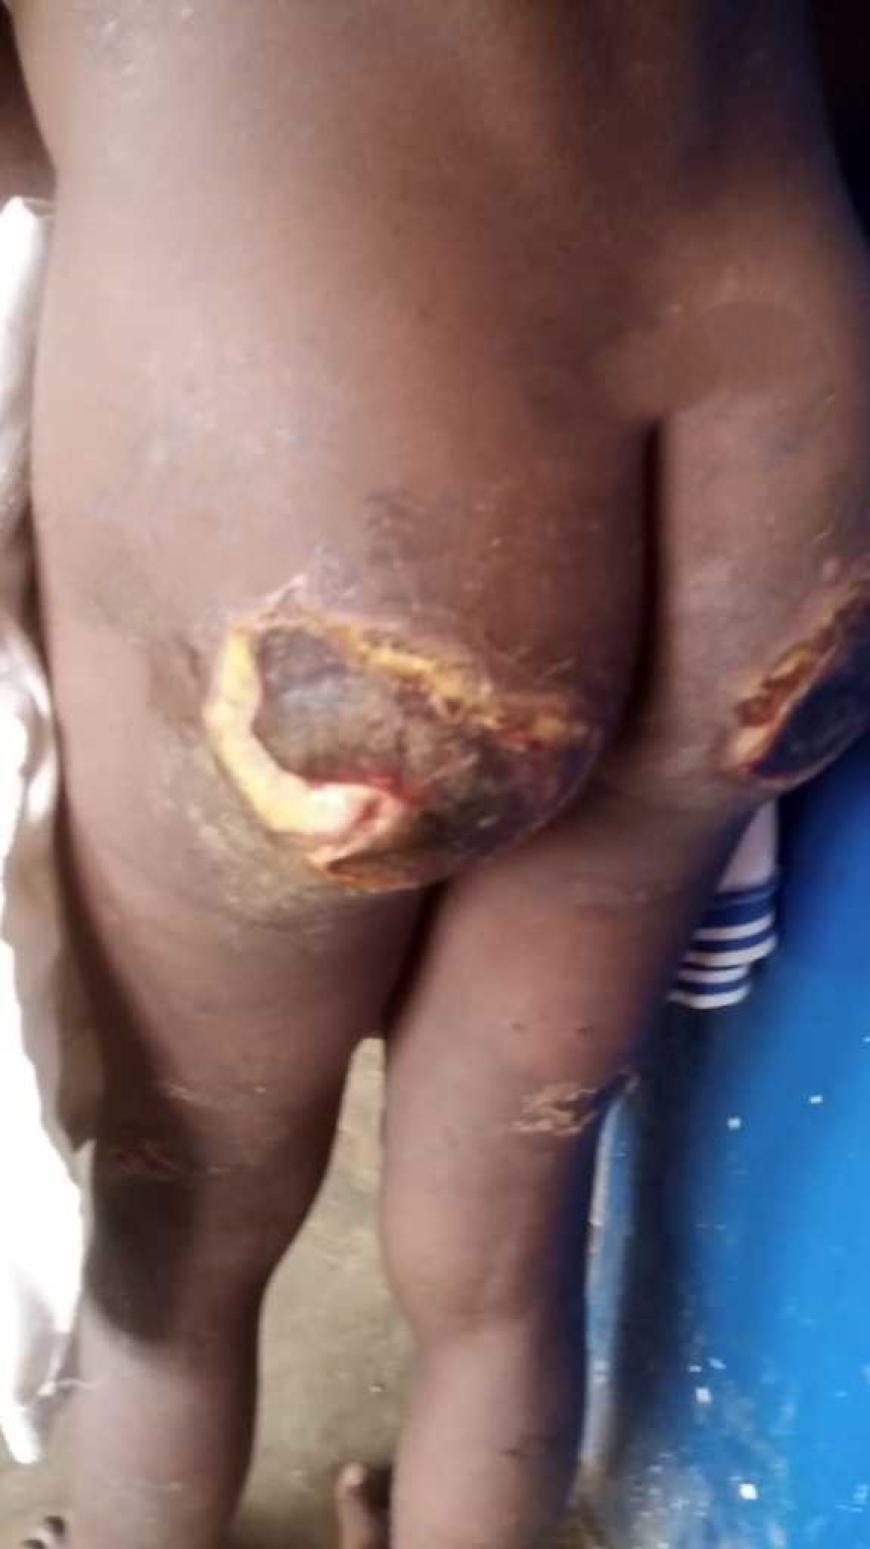 For Stealing LRD$50.00, Man Mercilessly Brutalized His 13 Year Old Son